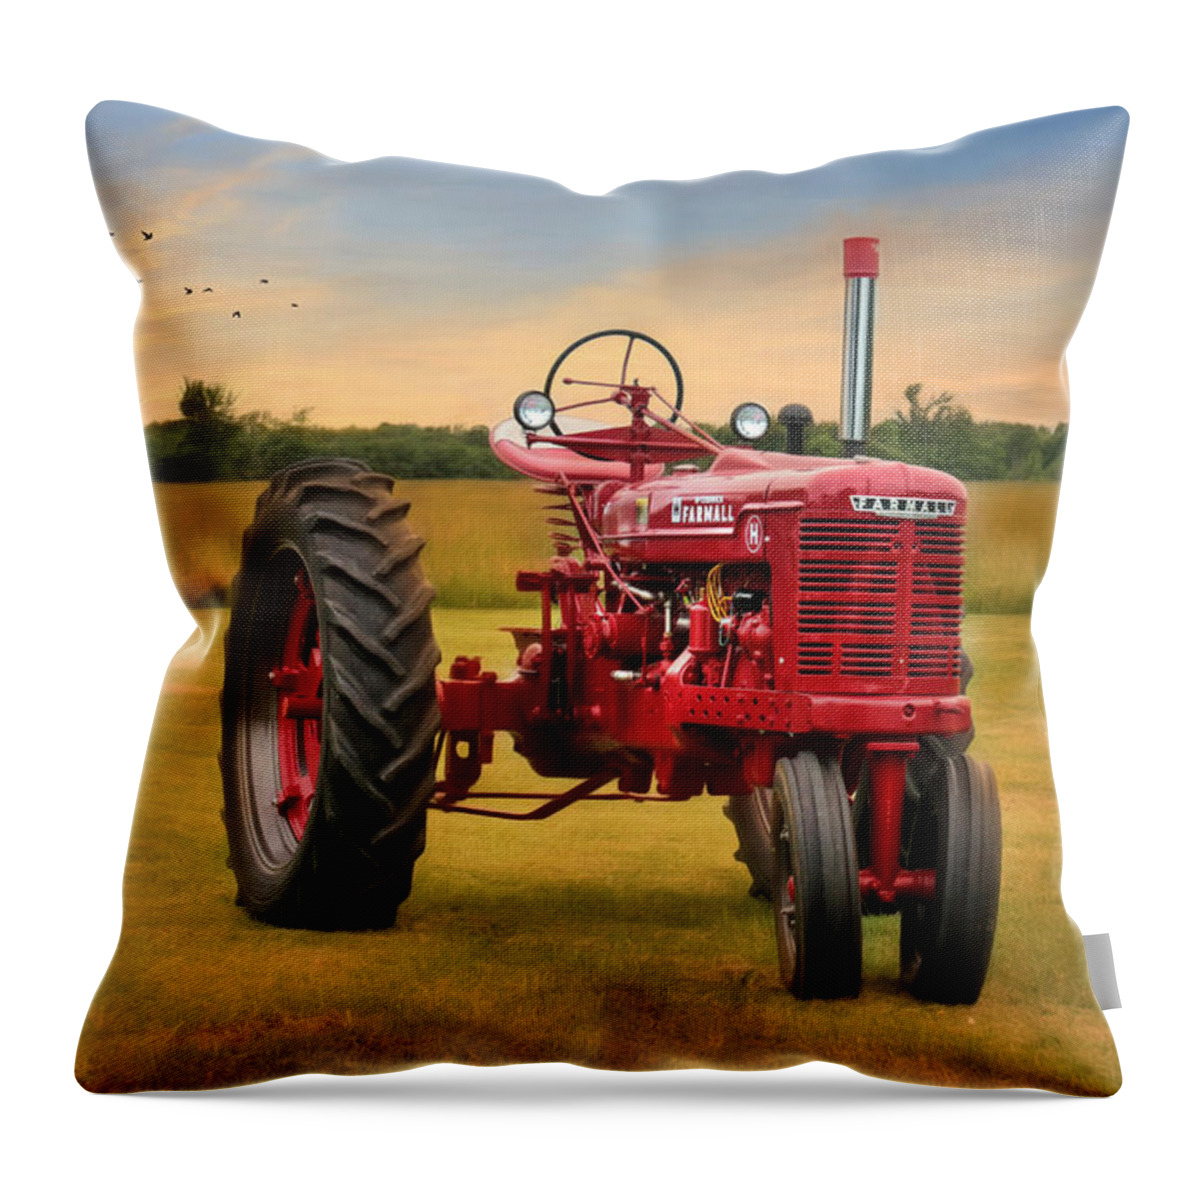 Tractor Throw Pillow featuring the photograph Big Red - Farmall Tractor by Lori Deiter